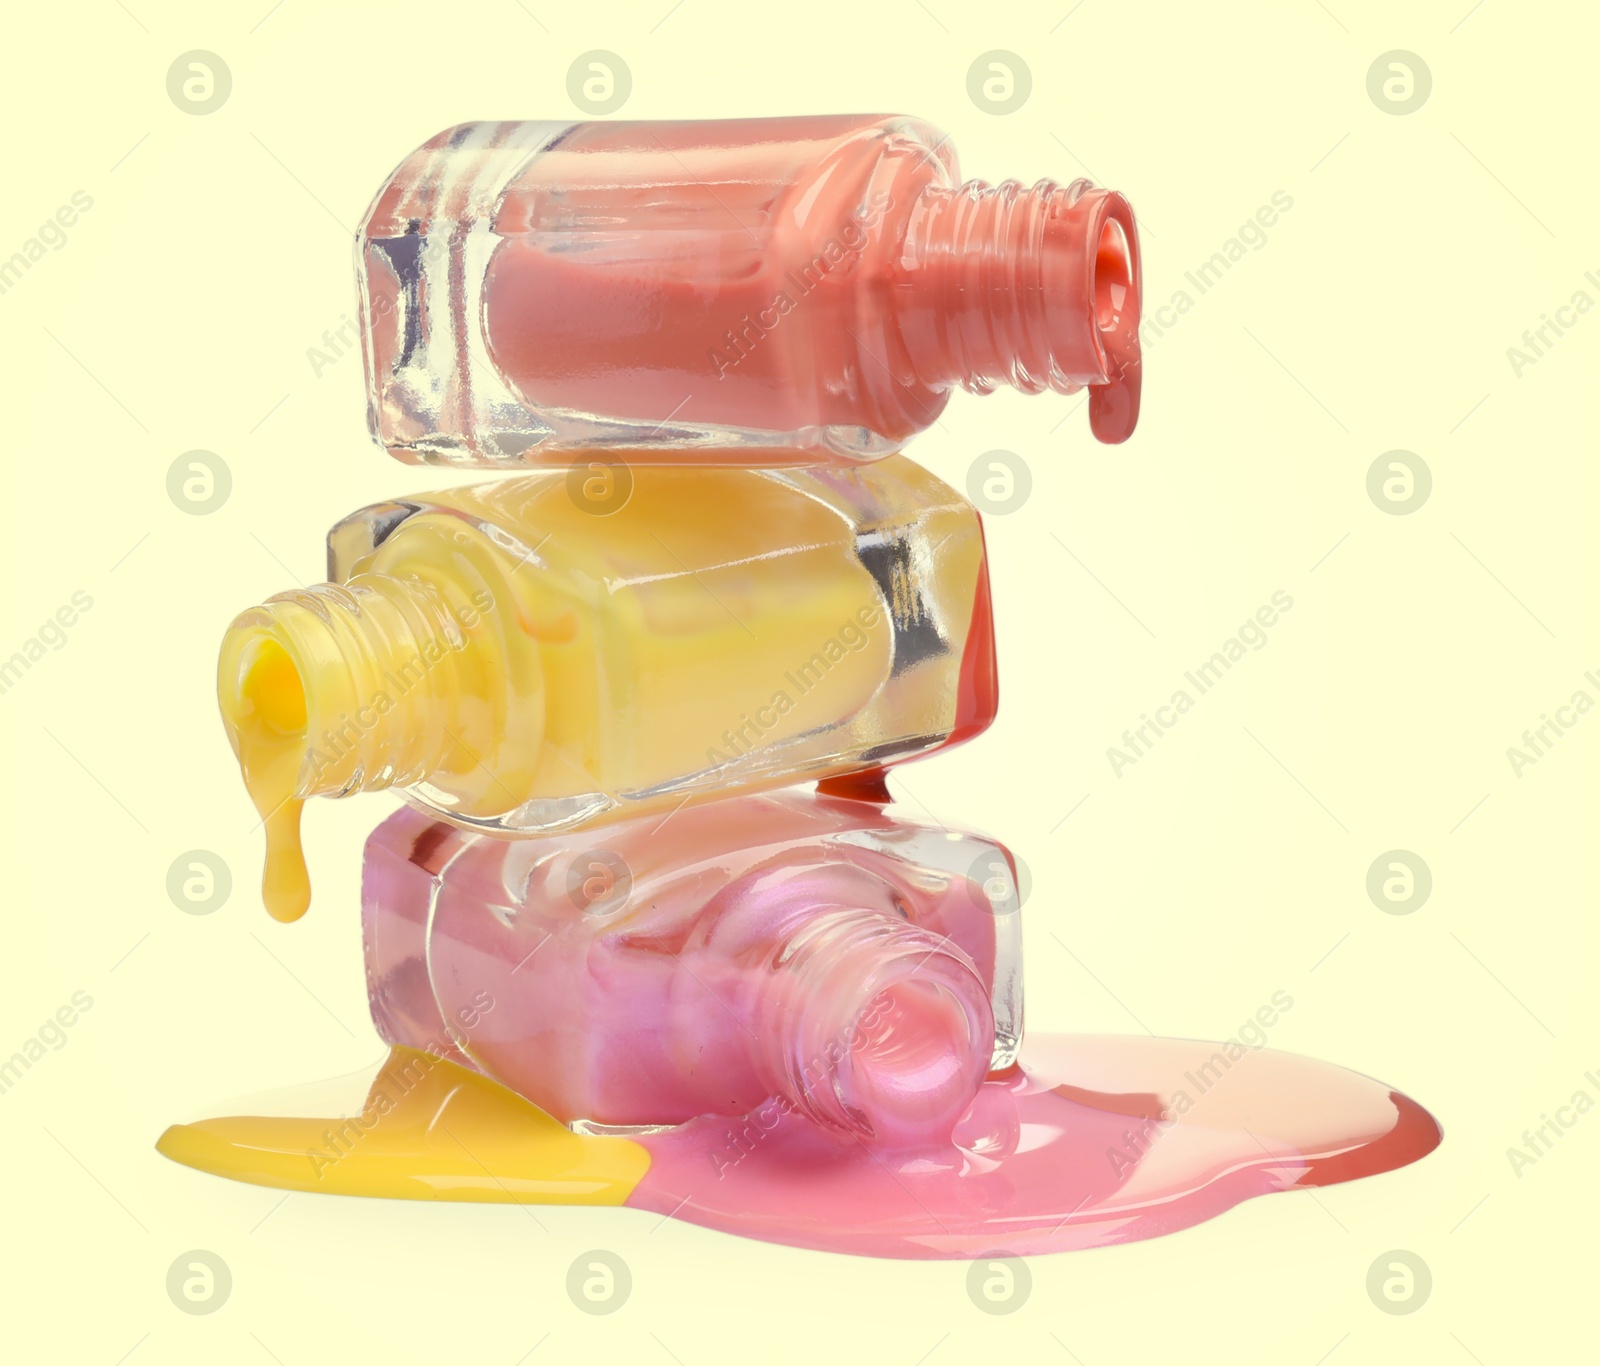 Image of Different nail polishes dripping from open bottles on pale yellow background